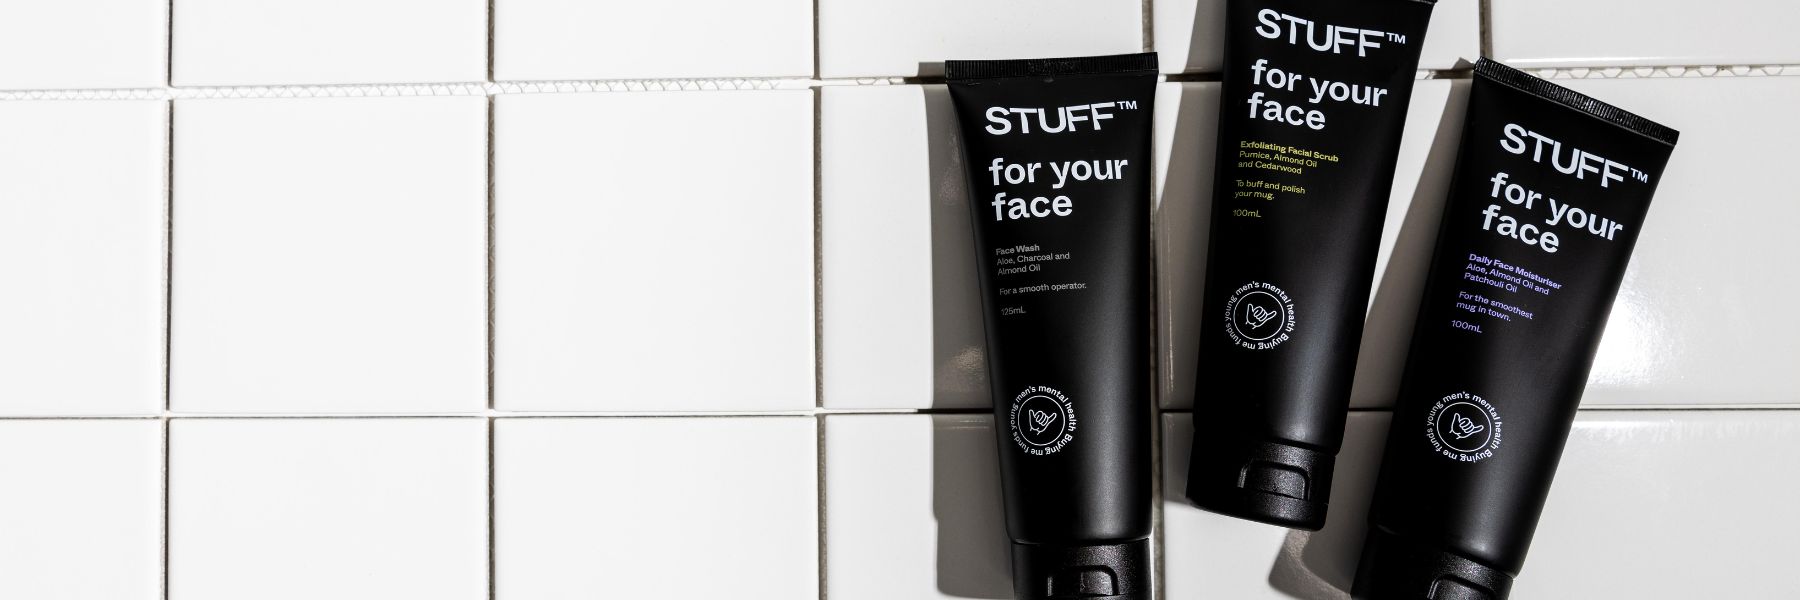 STUFF™ for your face